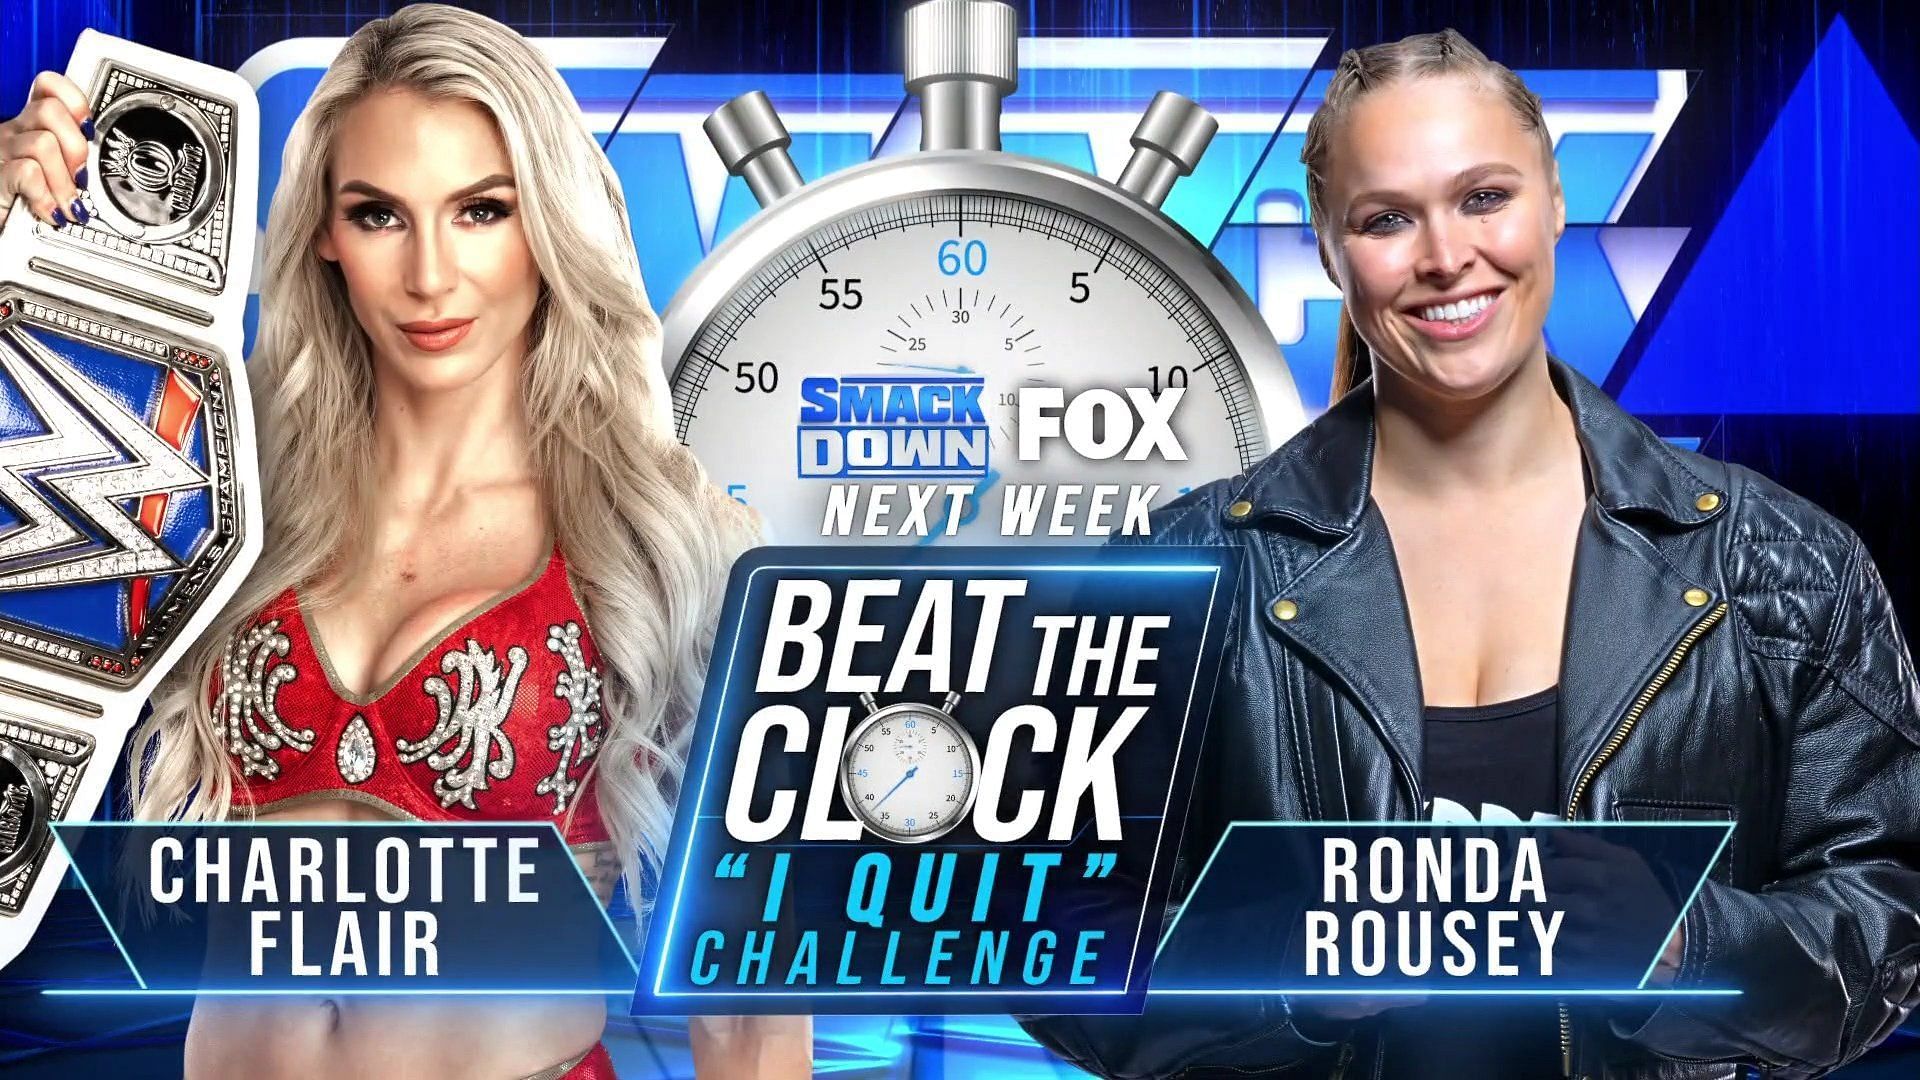 Charlotte Flair and Ronda Rousey will try to beat the clock next week